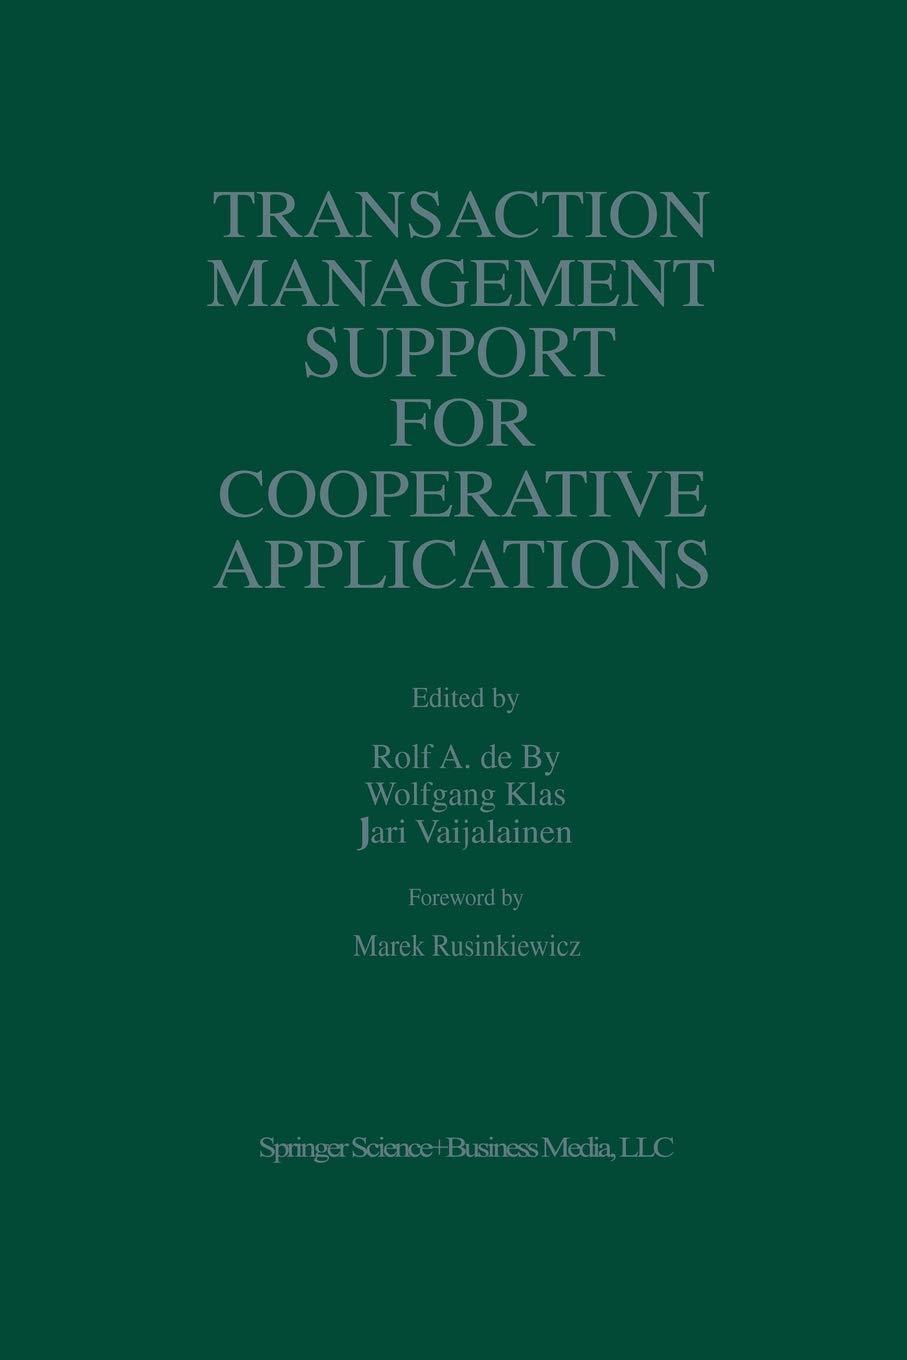 transaction management support for cooperative applications 1998 edition rolf a. de by , wolfgang klas, j.